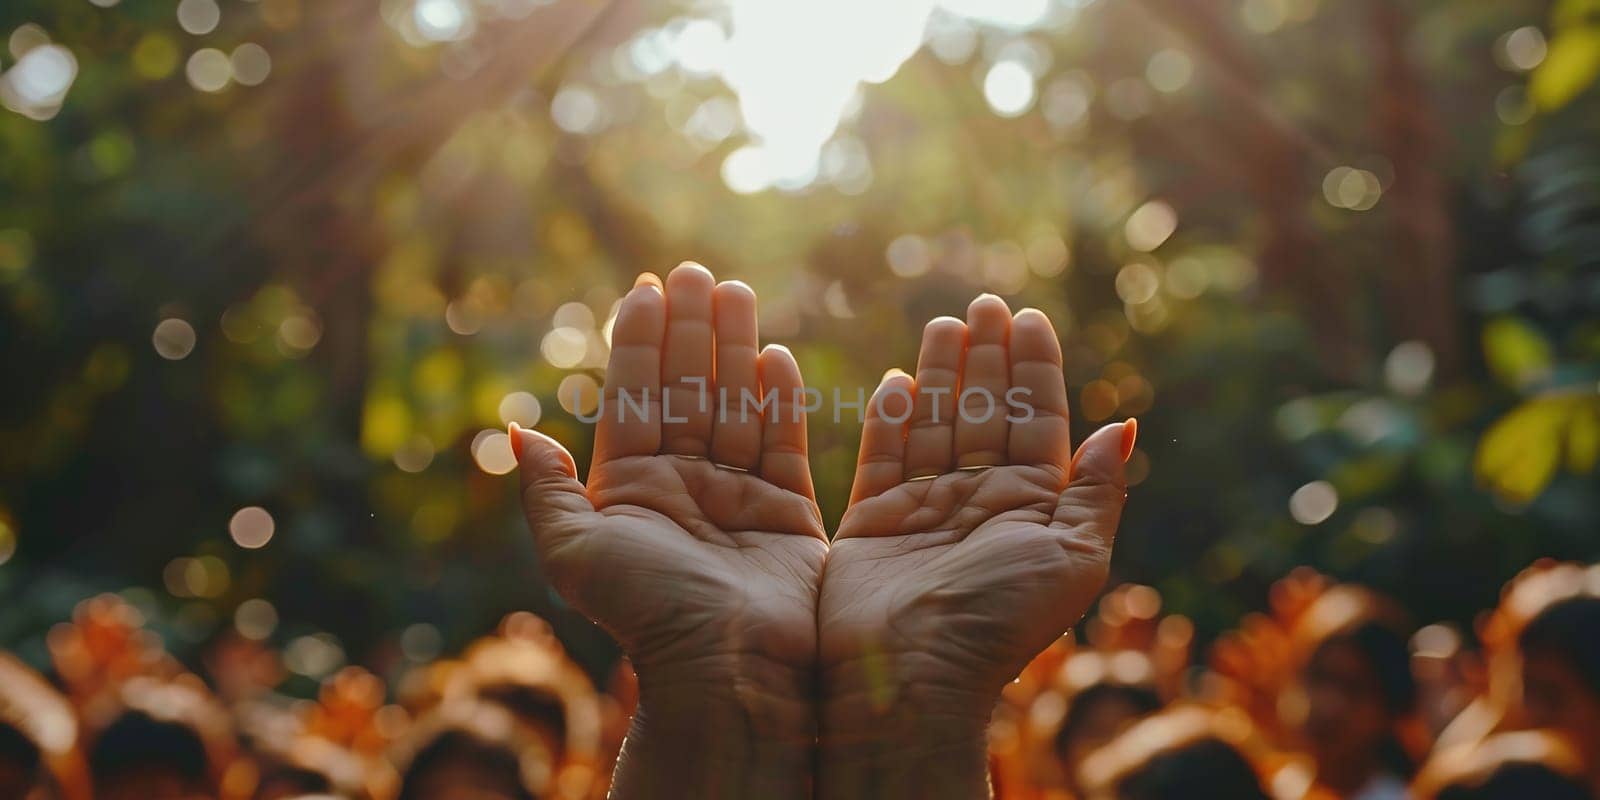 Human open empty hands with palms up, over blurred nature background. High quality photo